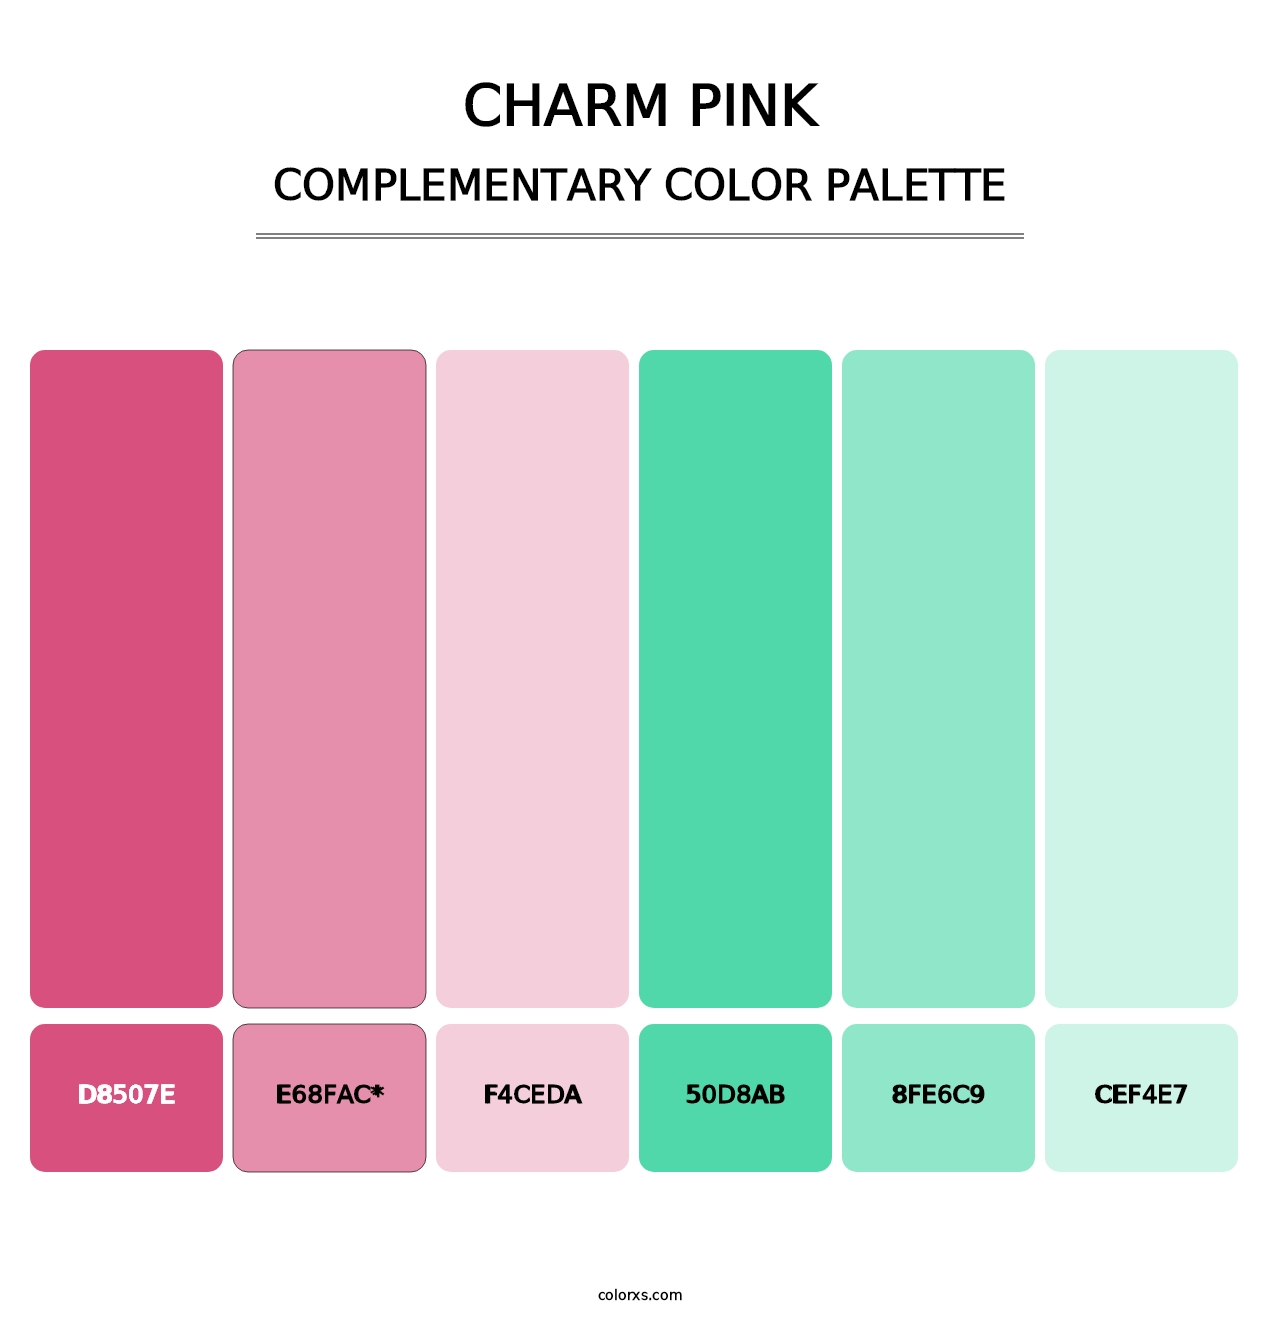 Charm Pink - Complementary Color Palette